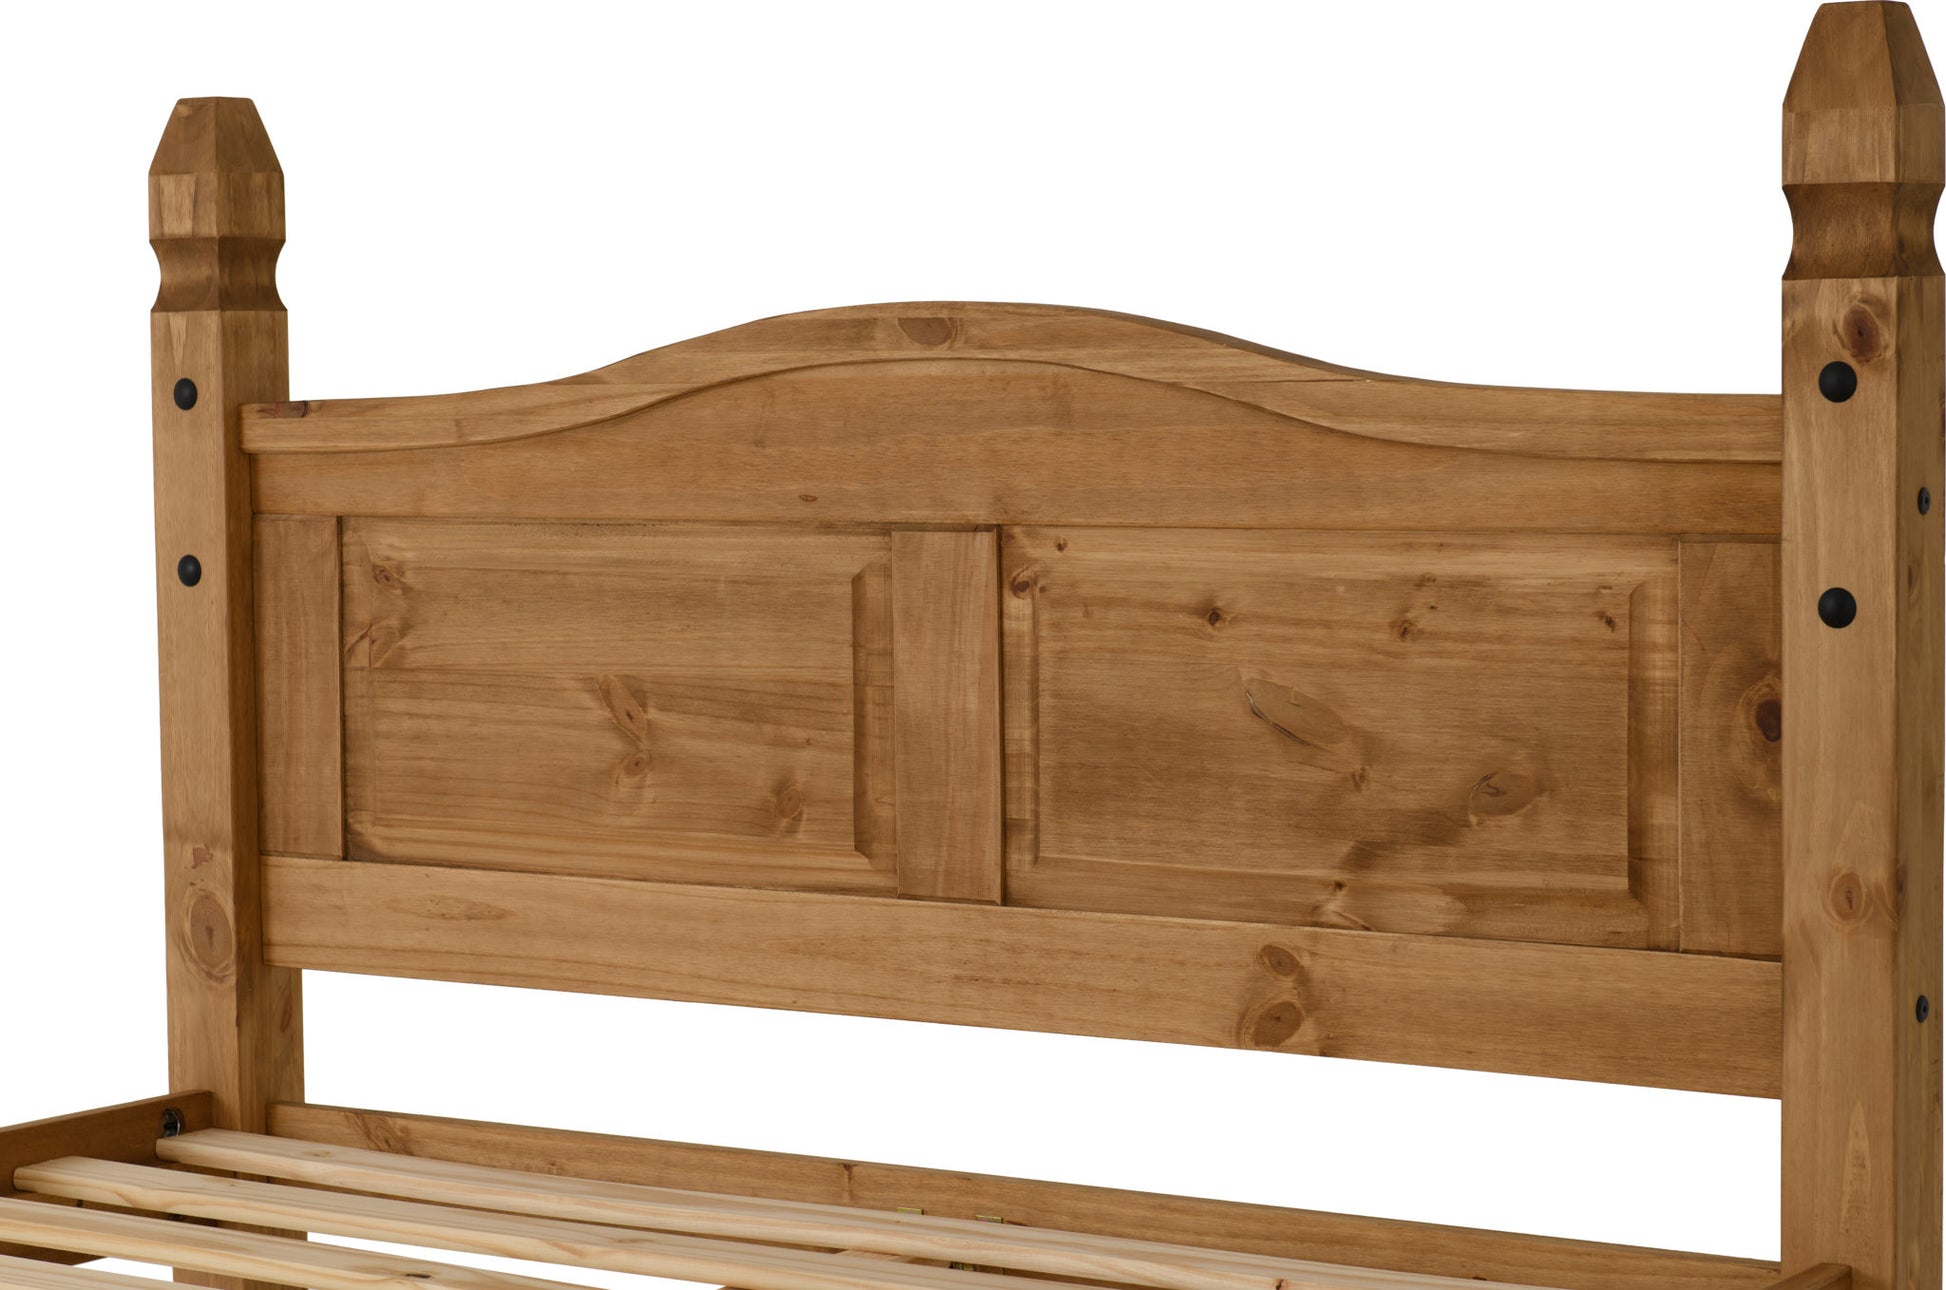 Corona 4'6" Double Bed High Foot End - Distressed Waxed Pine